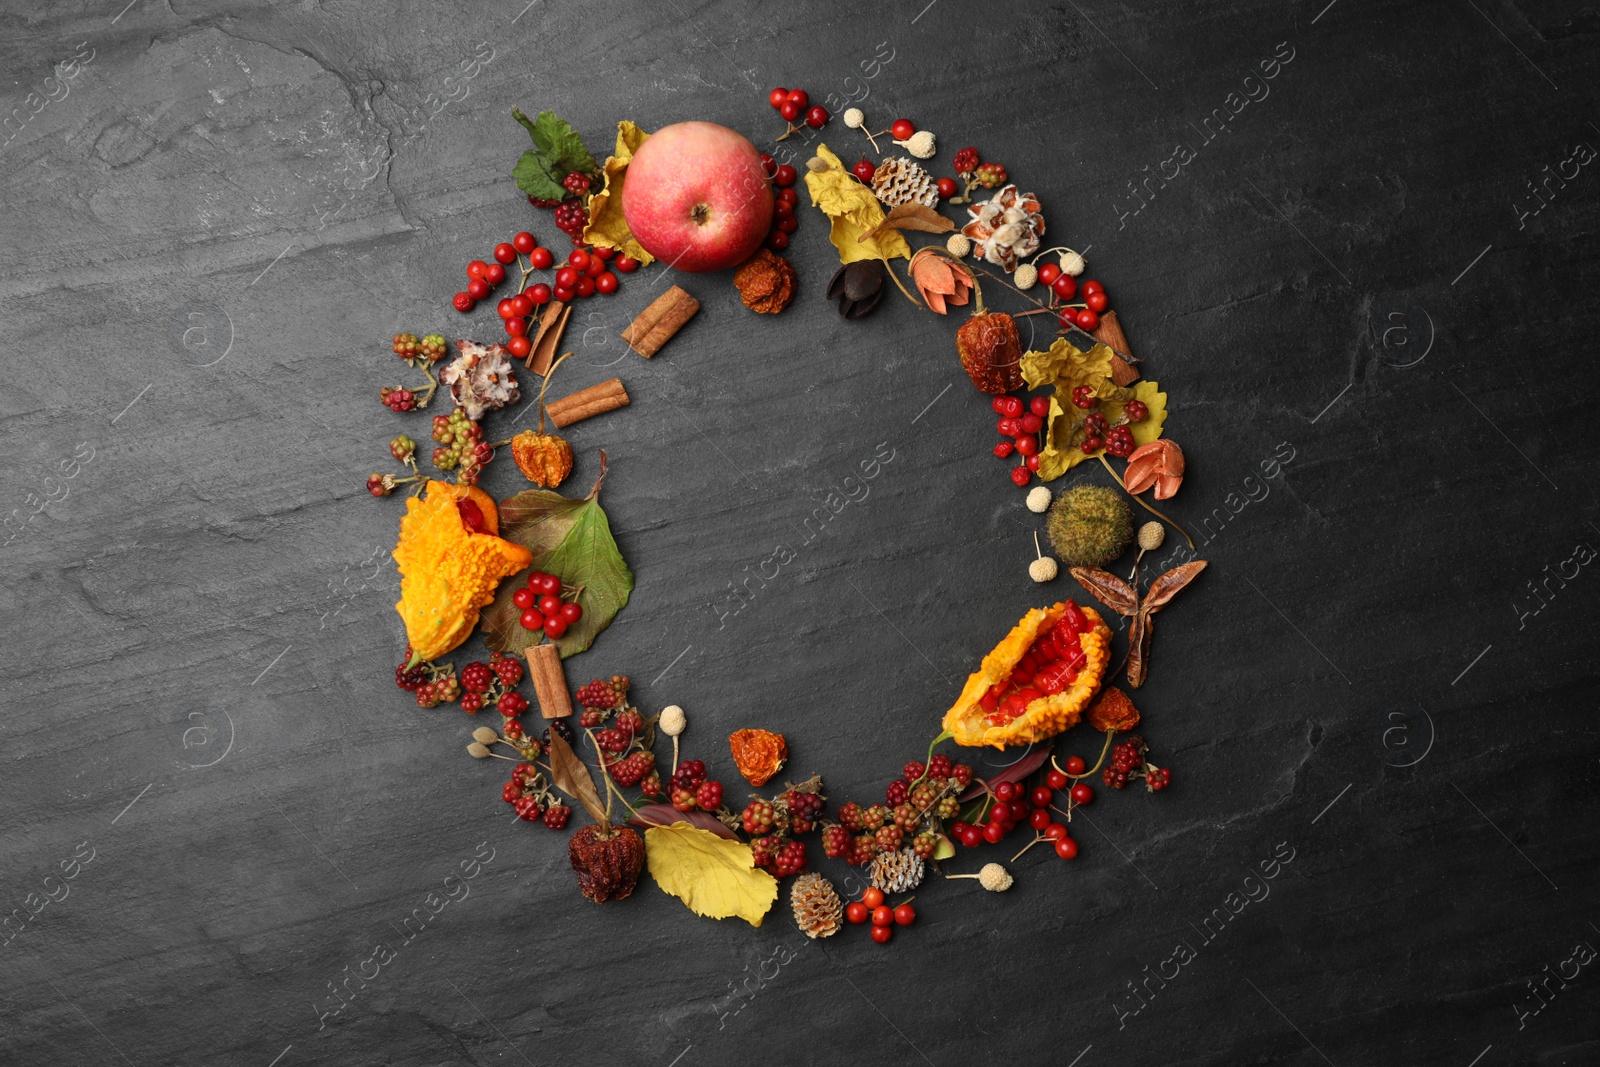 Photo of Dried flowers, leaves and berries arranged in shape of wreath on black background, flat lay with space for text. Autumnal aesthetic